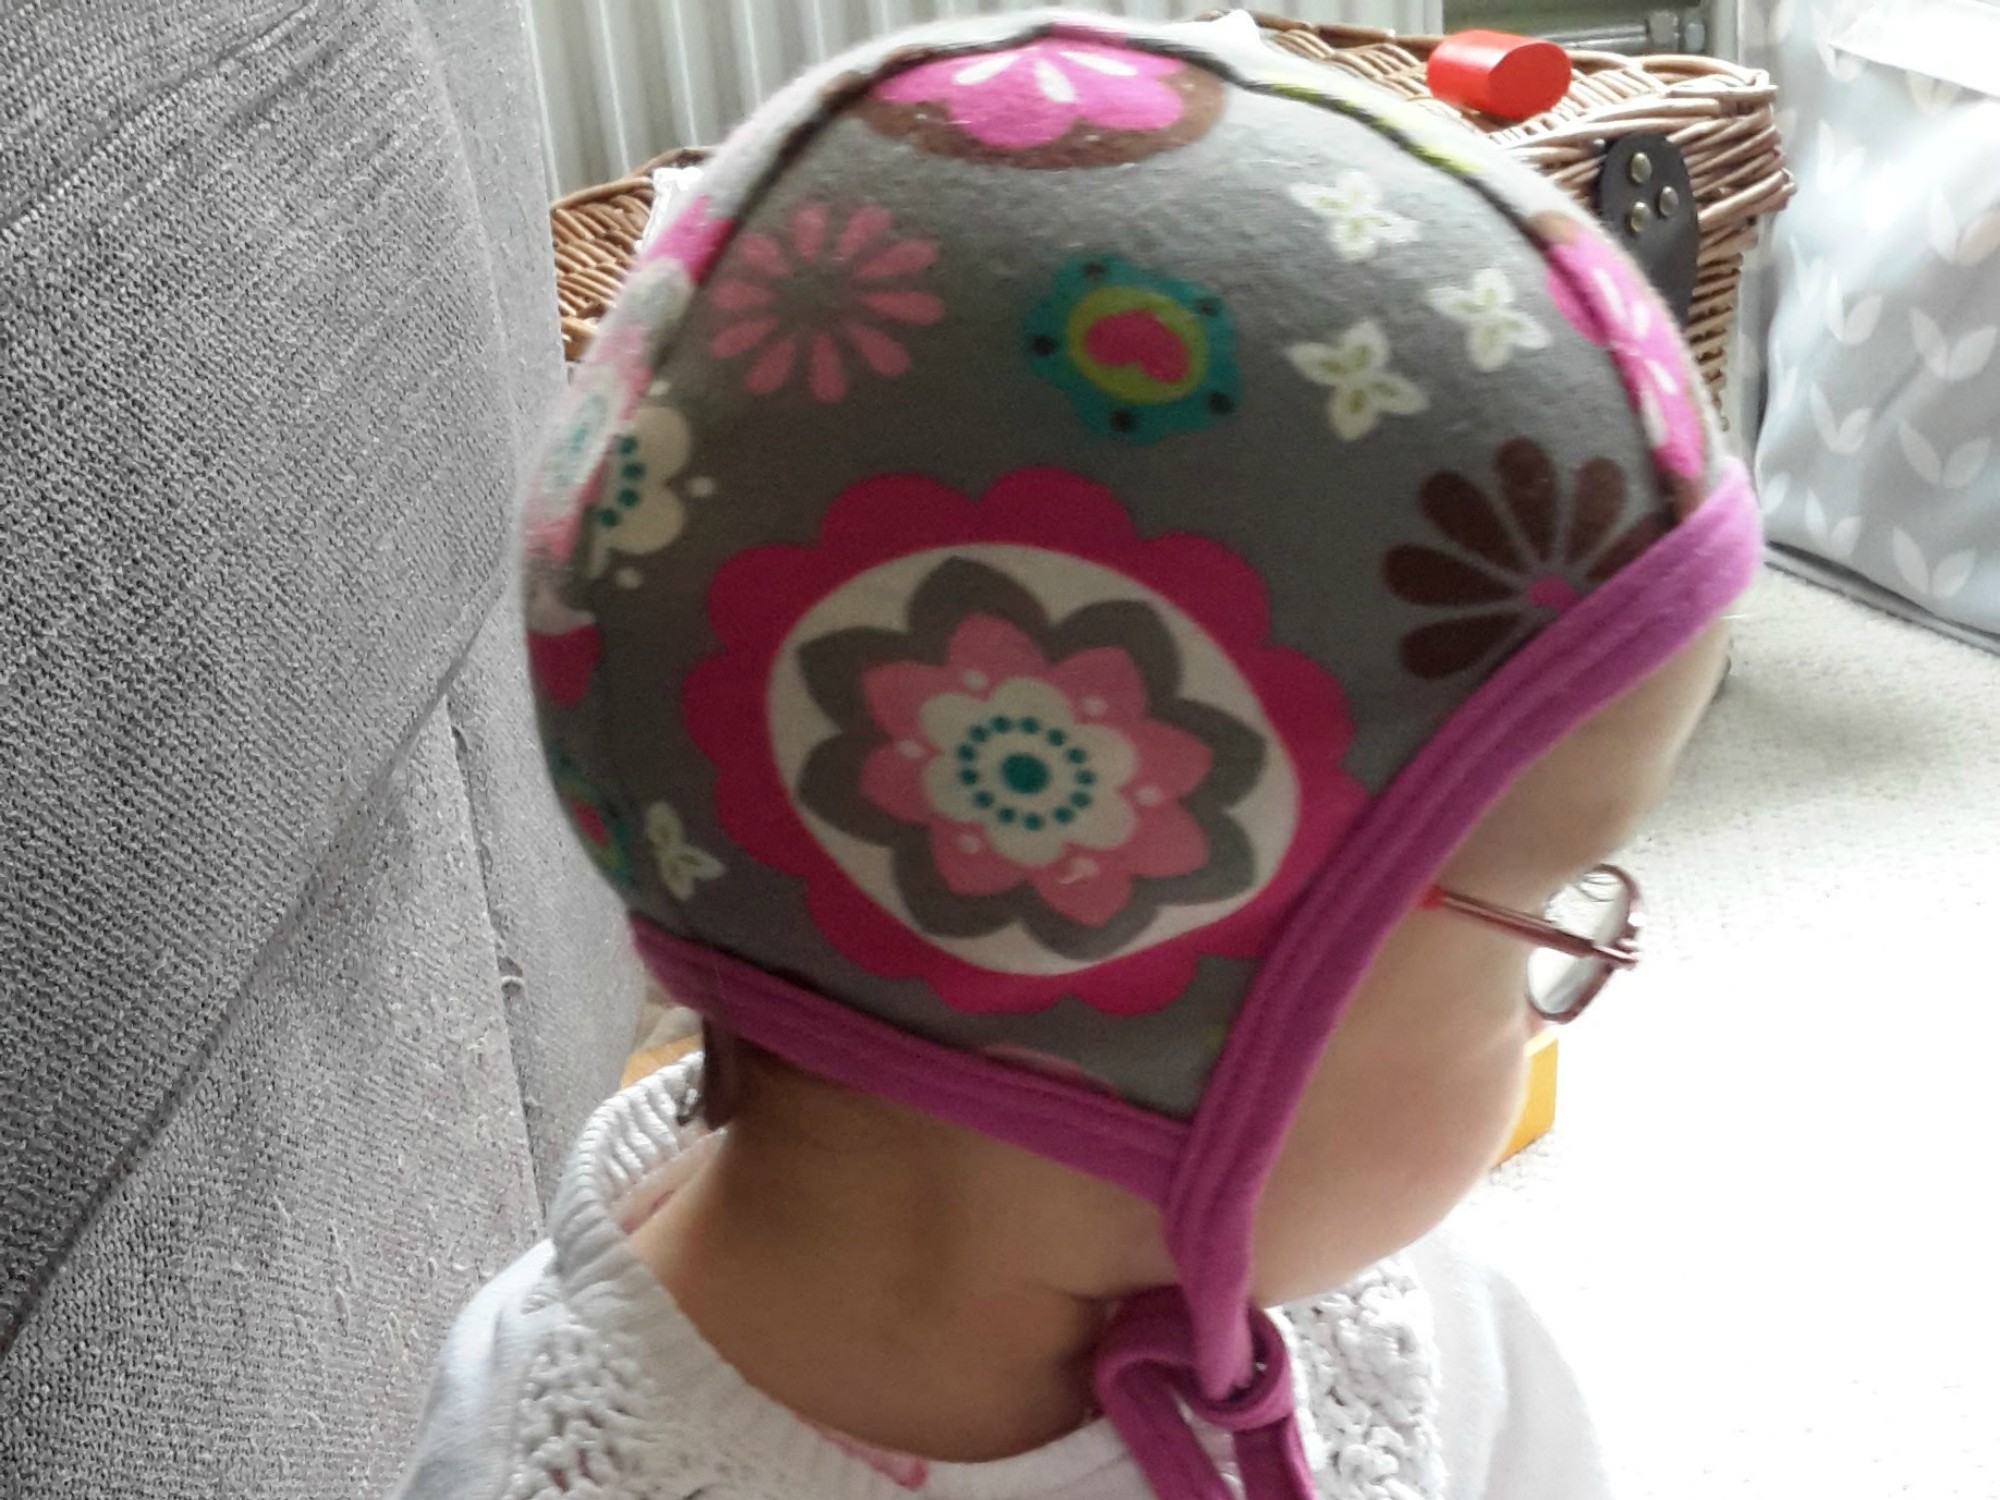 A young girl with a pilot hat on her head